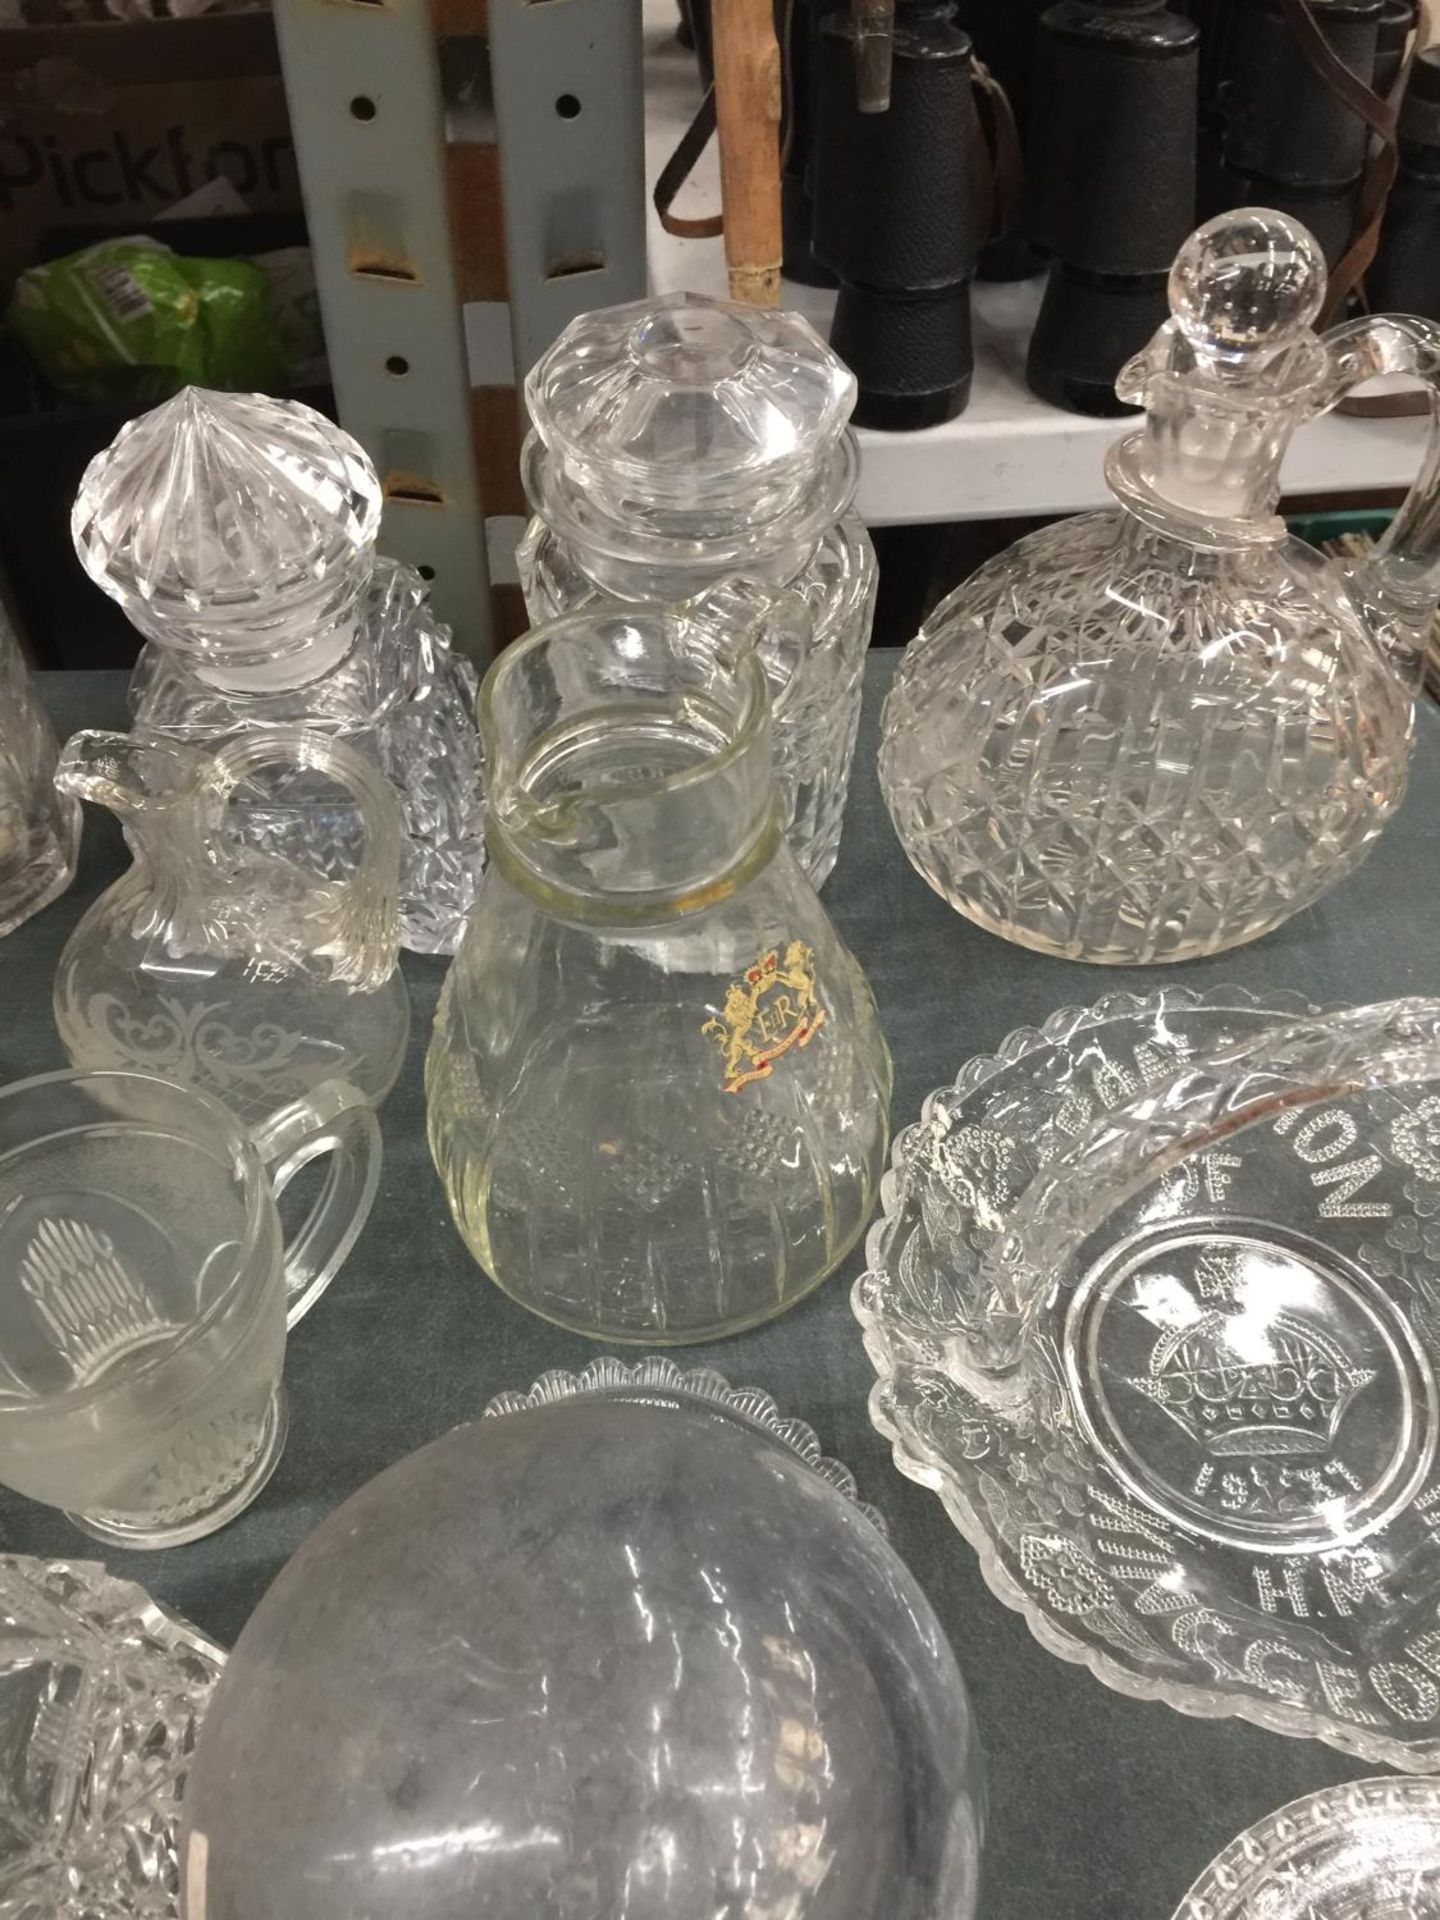 A QUANTITY OF GLASSWARE TO INCLUDE A 19TH CENTURY GLASS BAROMETER - A/F, JUGS, DISHES ETC - Image 4 of 6